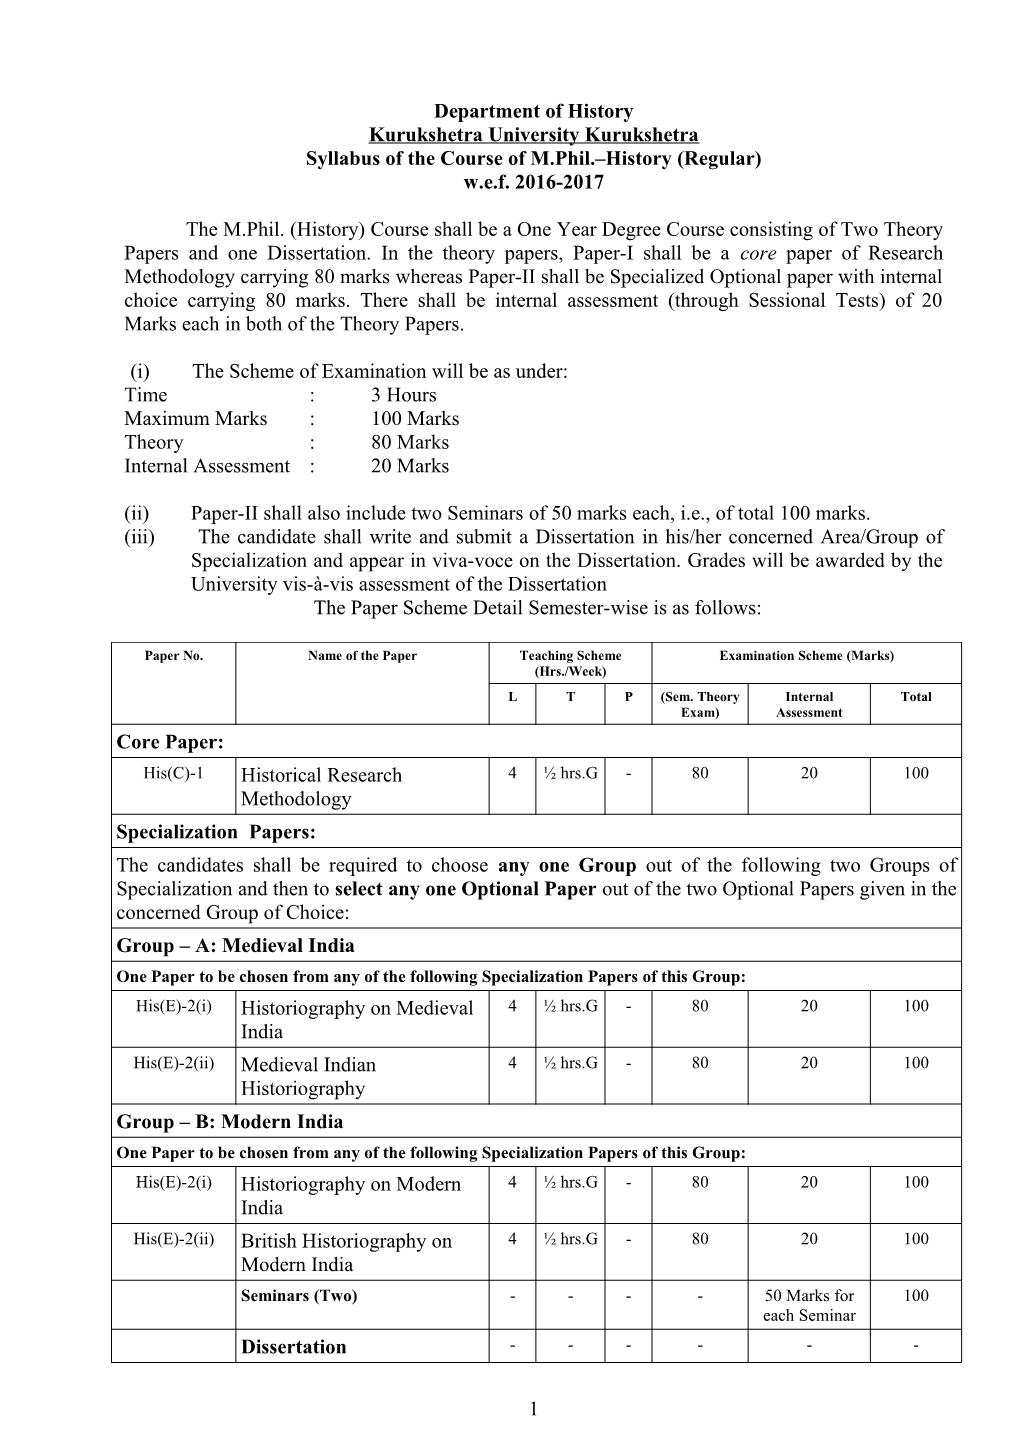 Syllabus of the Course of M.Phil. History (Regular)